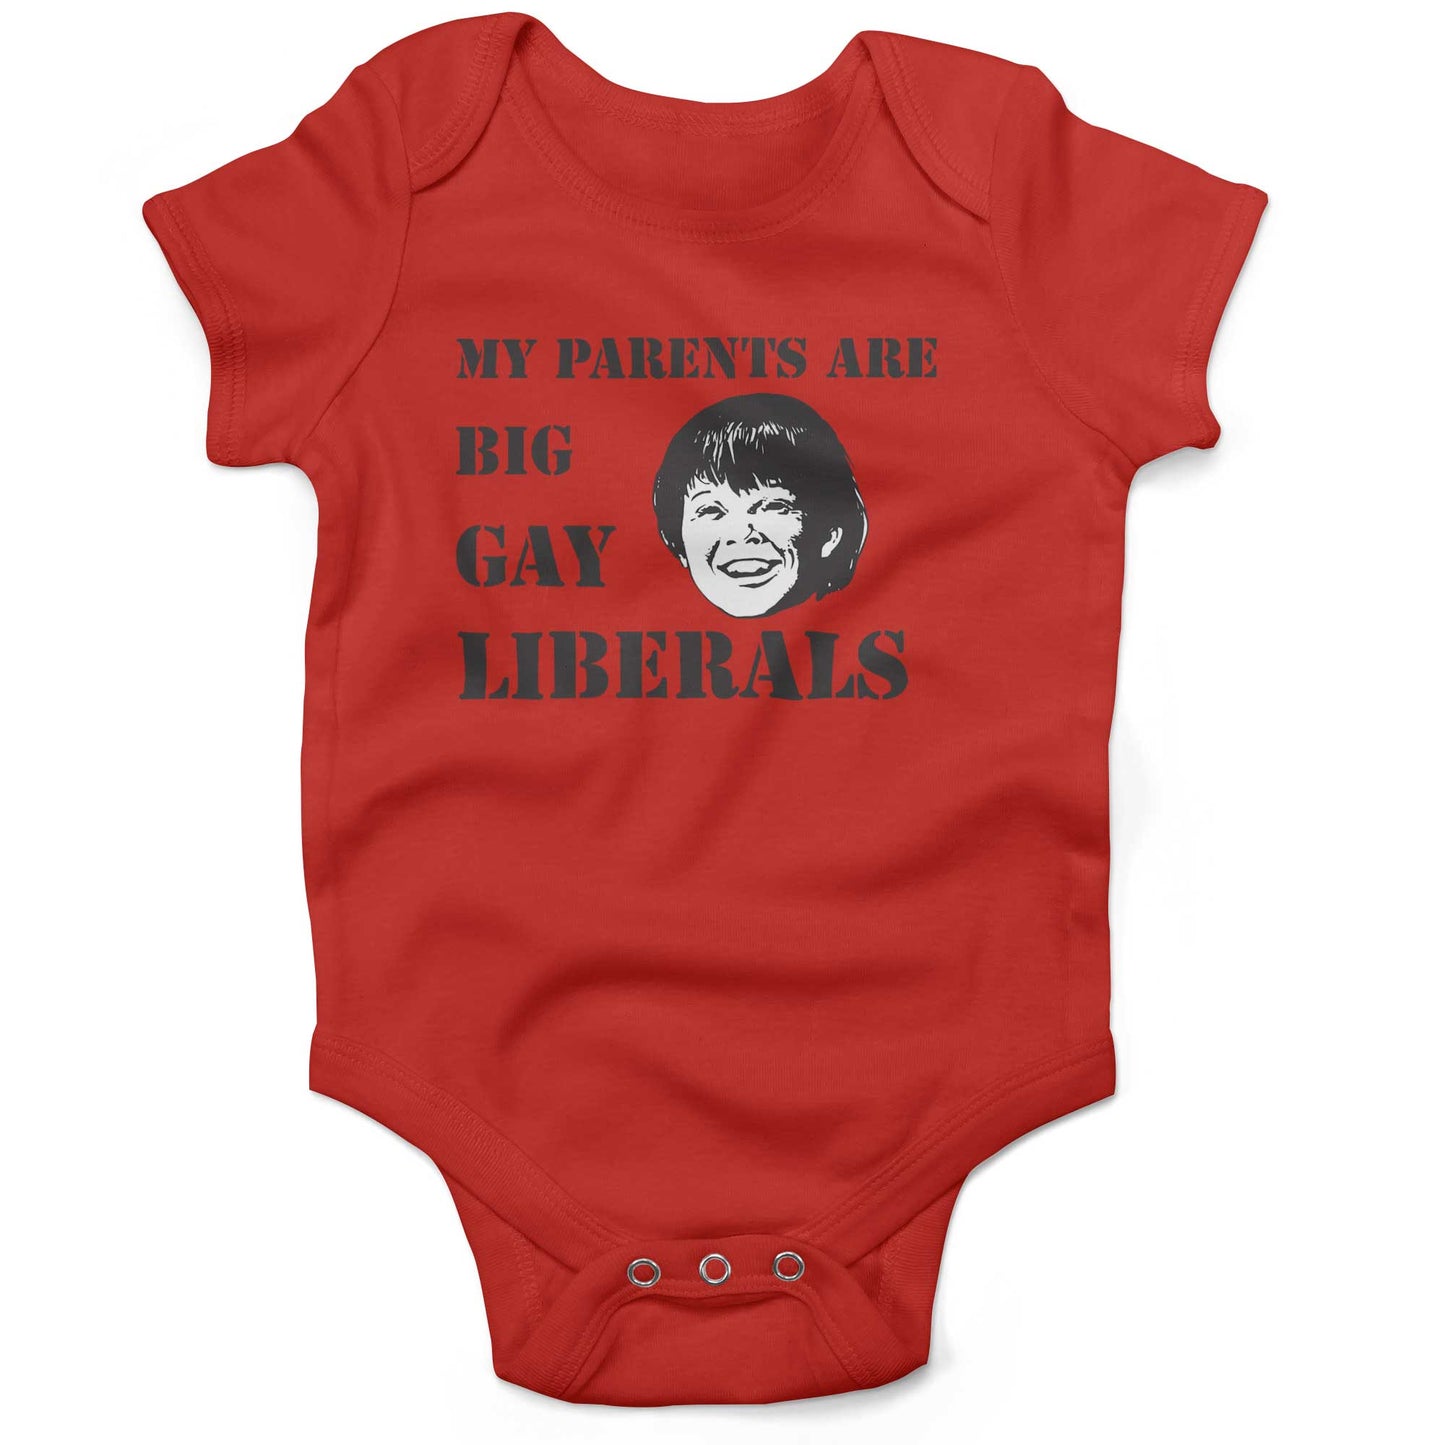 My Parents Are Big, Gay Liberals Infant Bodysuit or Raglan Baby Tee-Organic Red-3-6 months